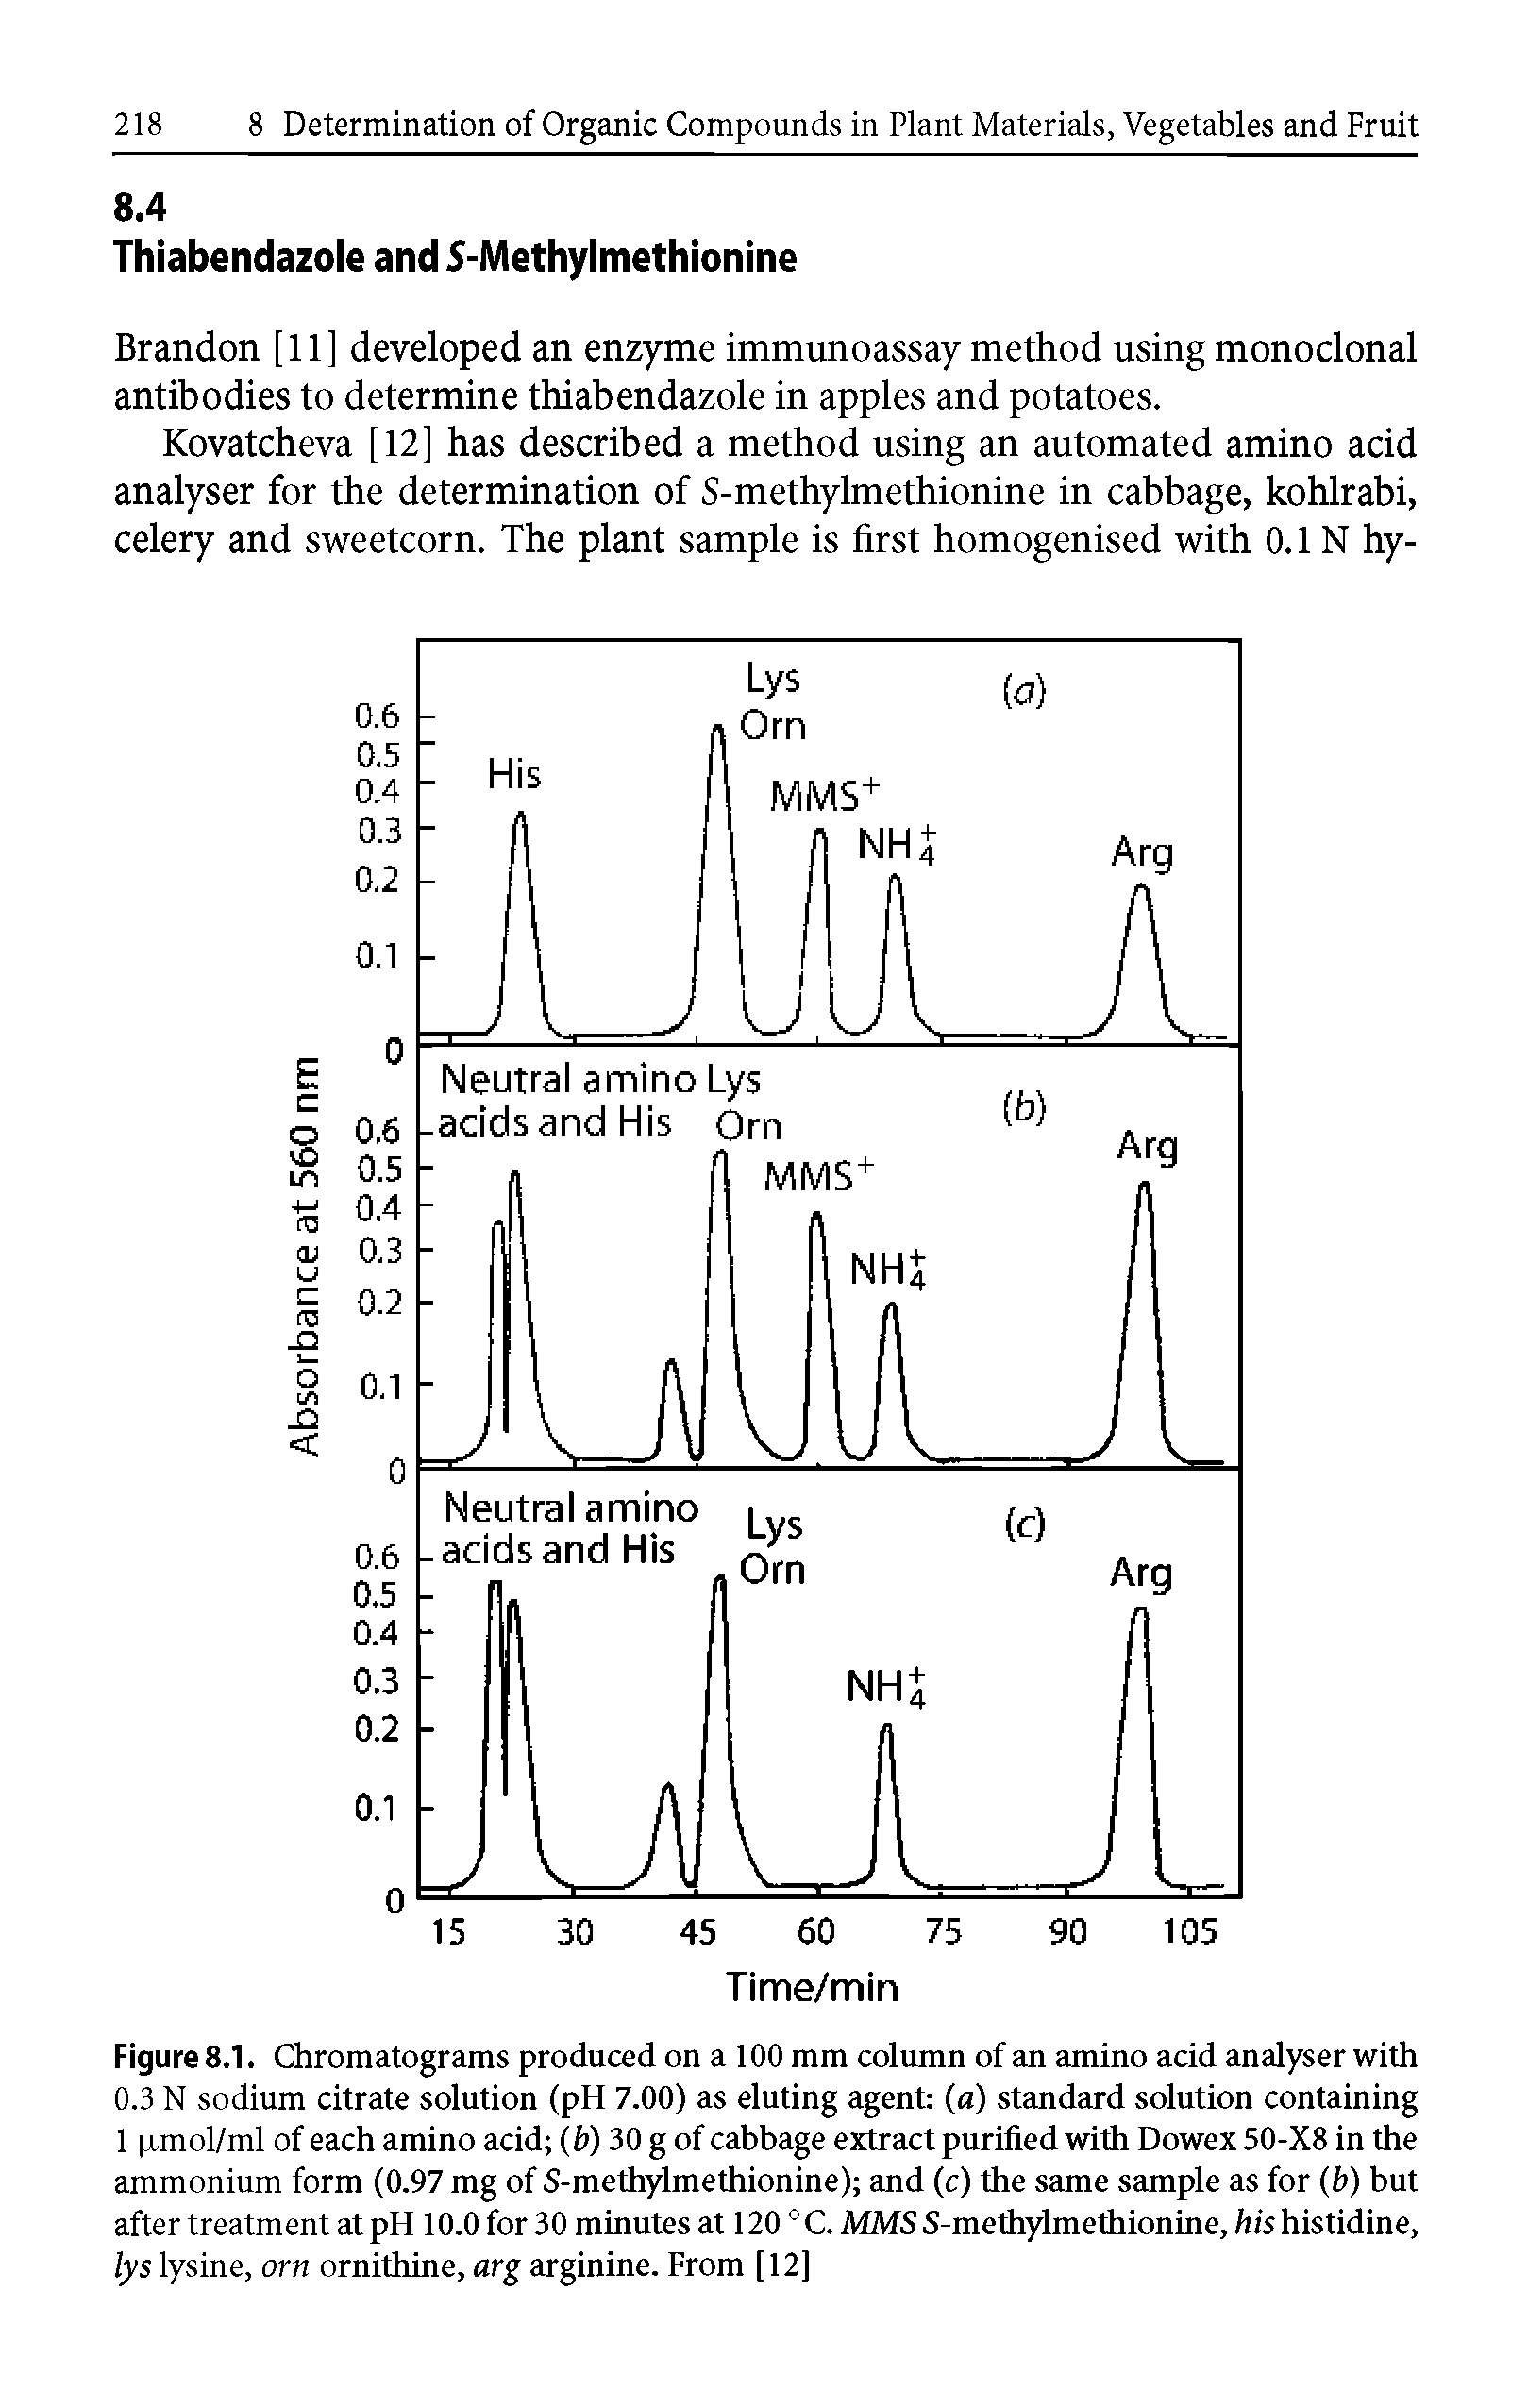 Figure 8.1. Chromatograms produced on a 100 mm column of an amino acid analyser with 0.3 N sodium citrate solution (pH 7.00) as eluting agent (a) standard solution containing 1 unol/ml of each amino acid (b) 30 g of cabbage extract purified with Dowex 50-X8 in the ammonium form (0.97 mg of S-methylmethionine) and (c) the same sample as for (b) but after treatment at pH 10.0 for 30 minutes at 120 C. MMS S-methylmethionine, fils histidine, lys lysine, orn ornithine, arg arginine. From [12]...